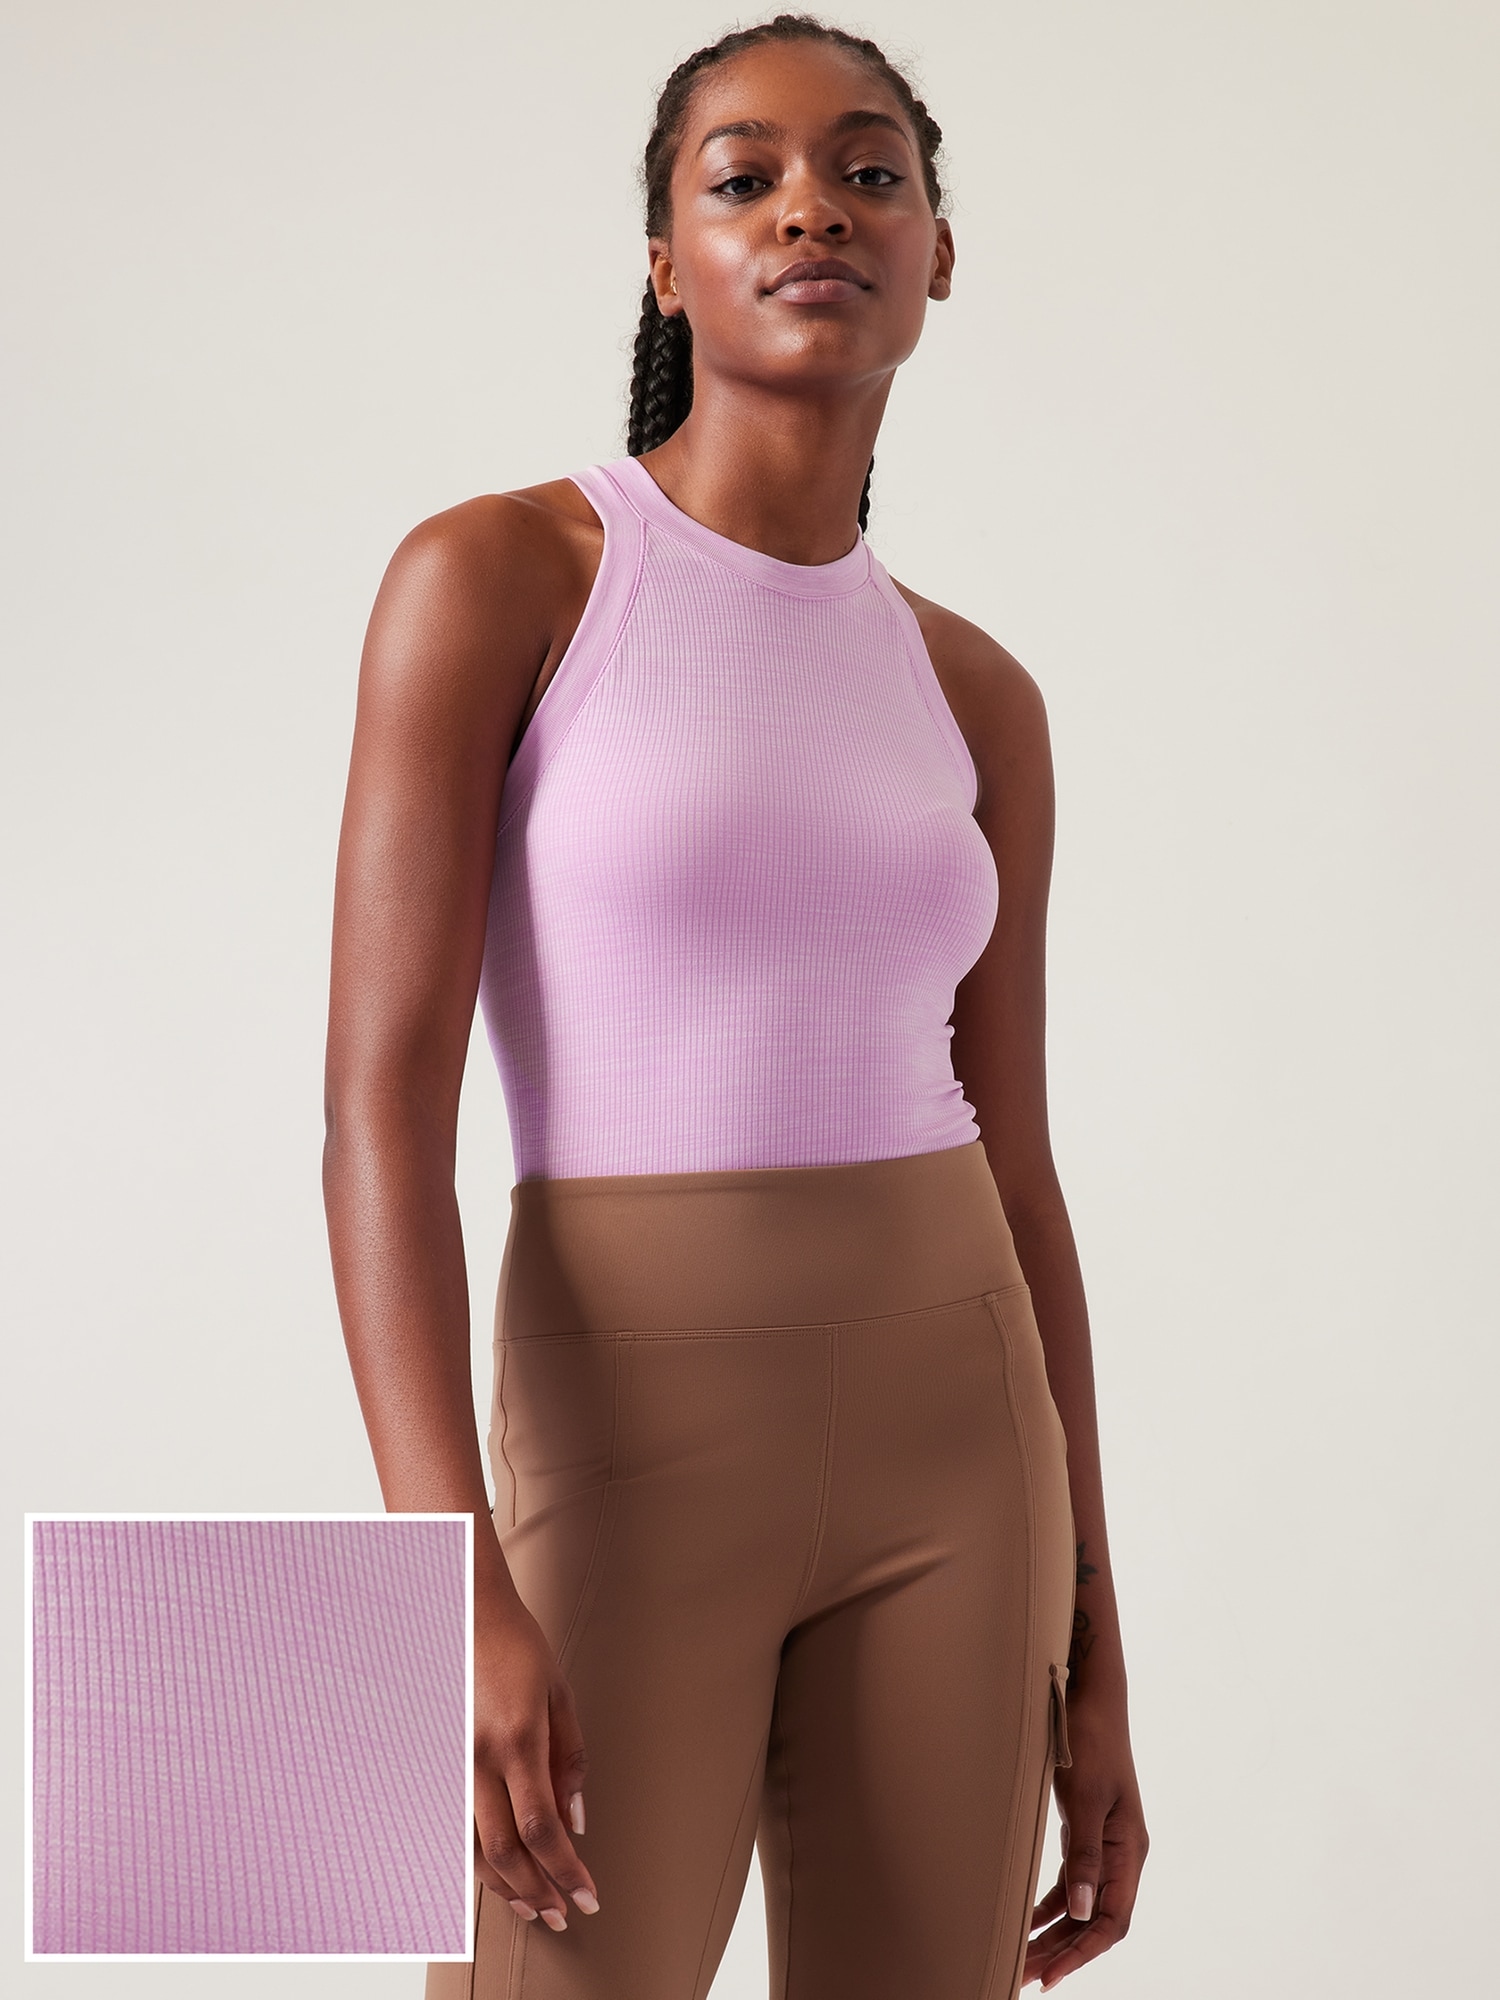 Athleta's Summer Sale Is Here—Shop 60% Off Brand Faves